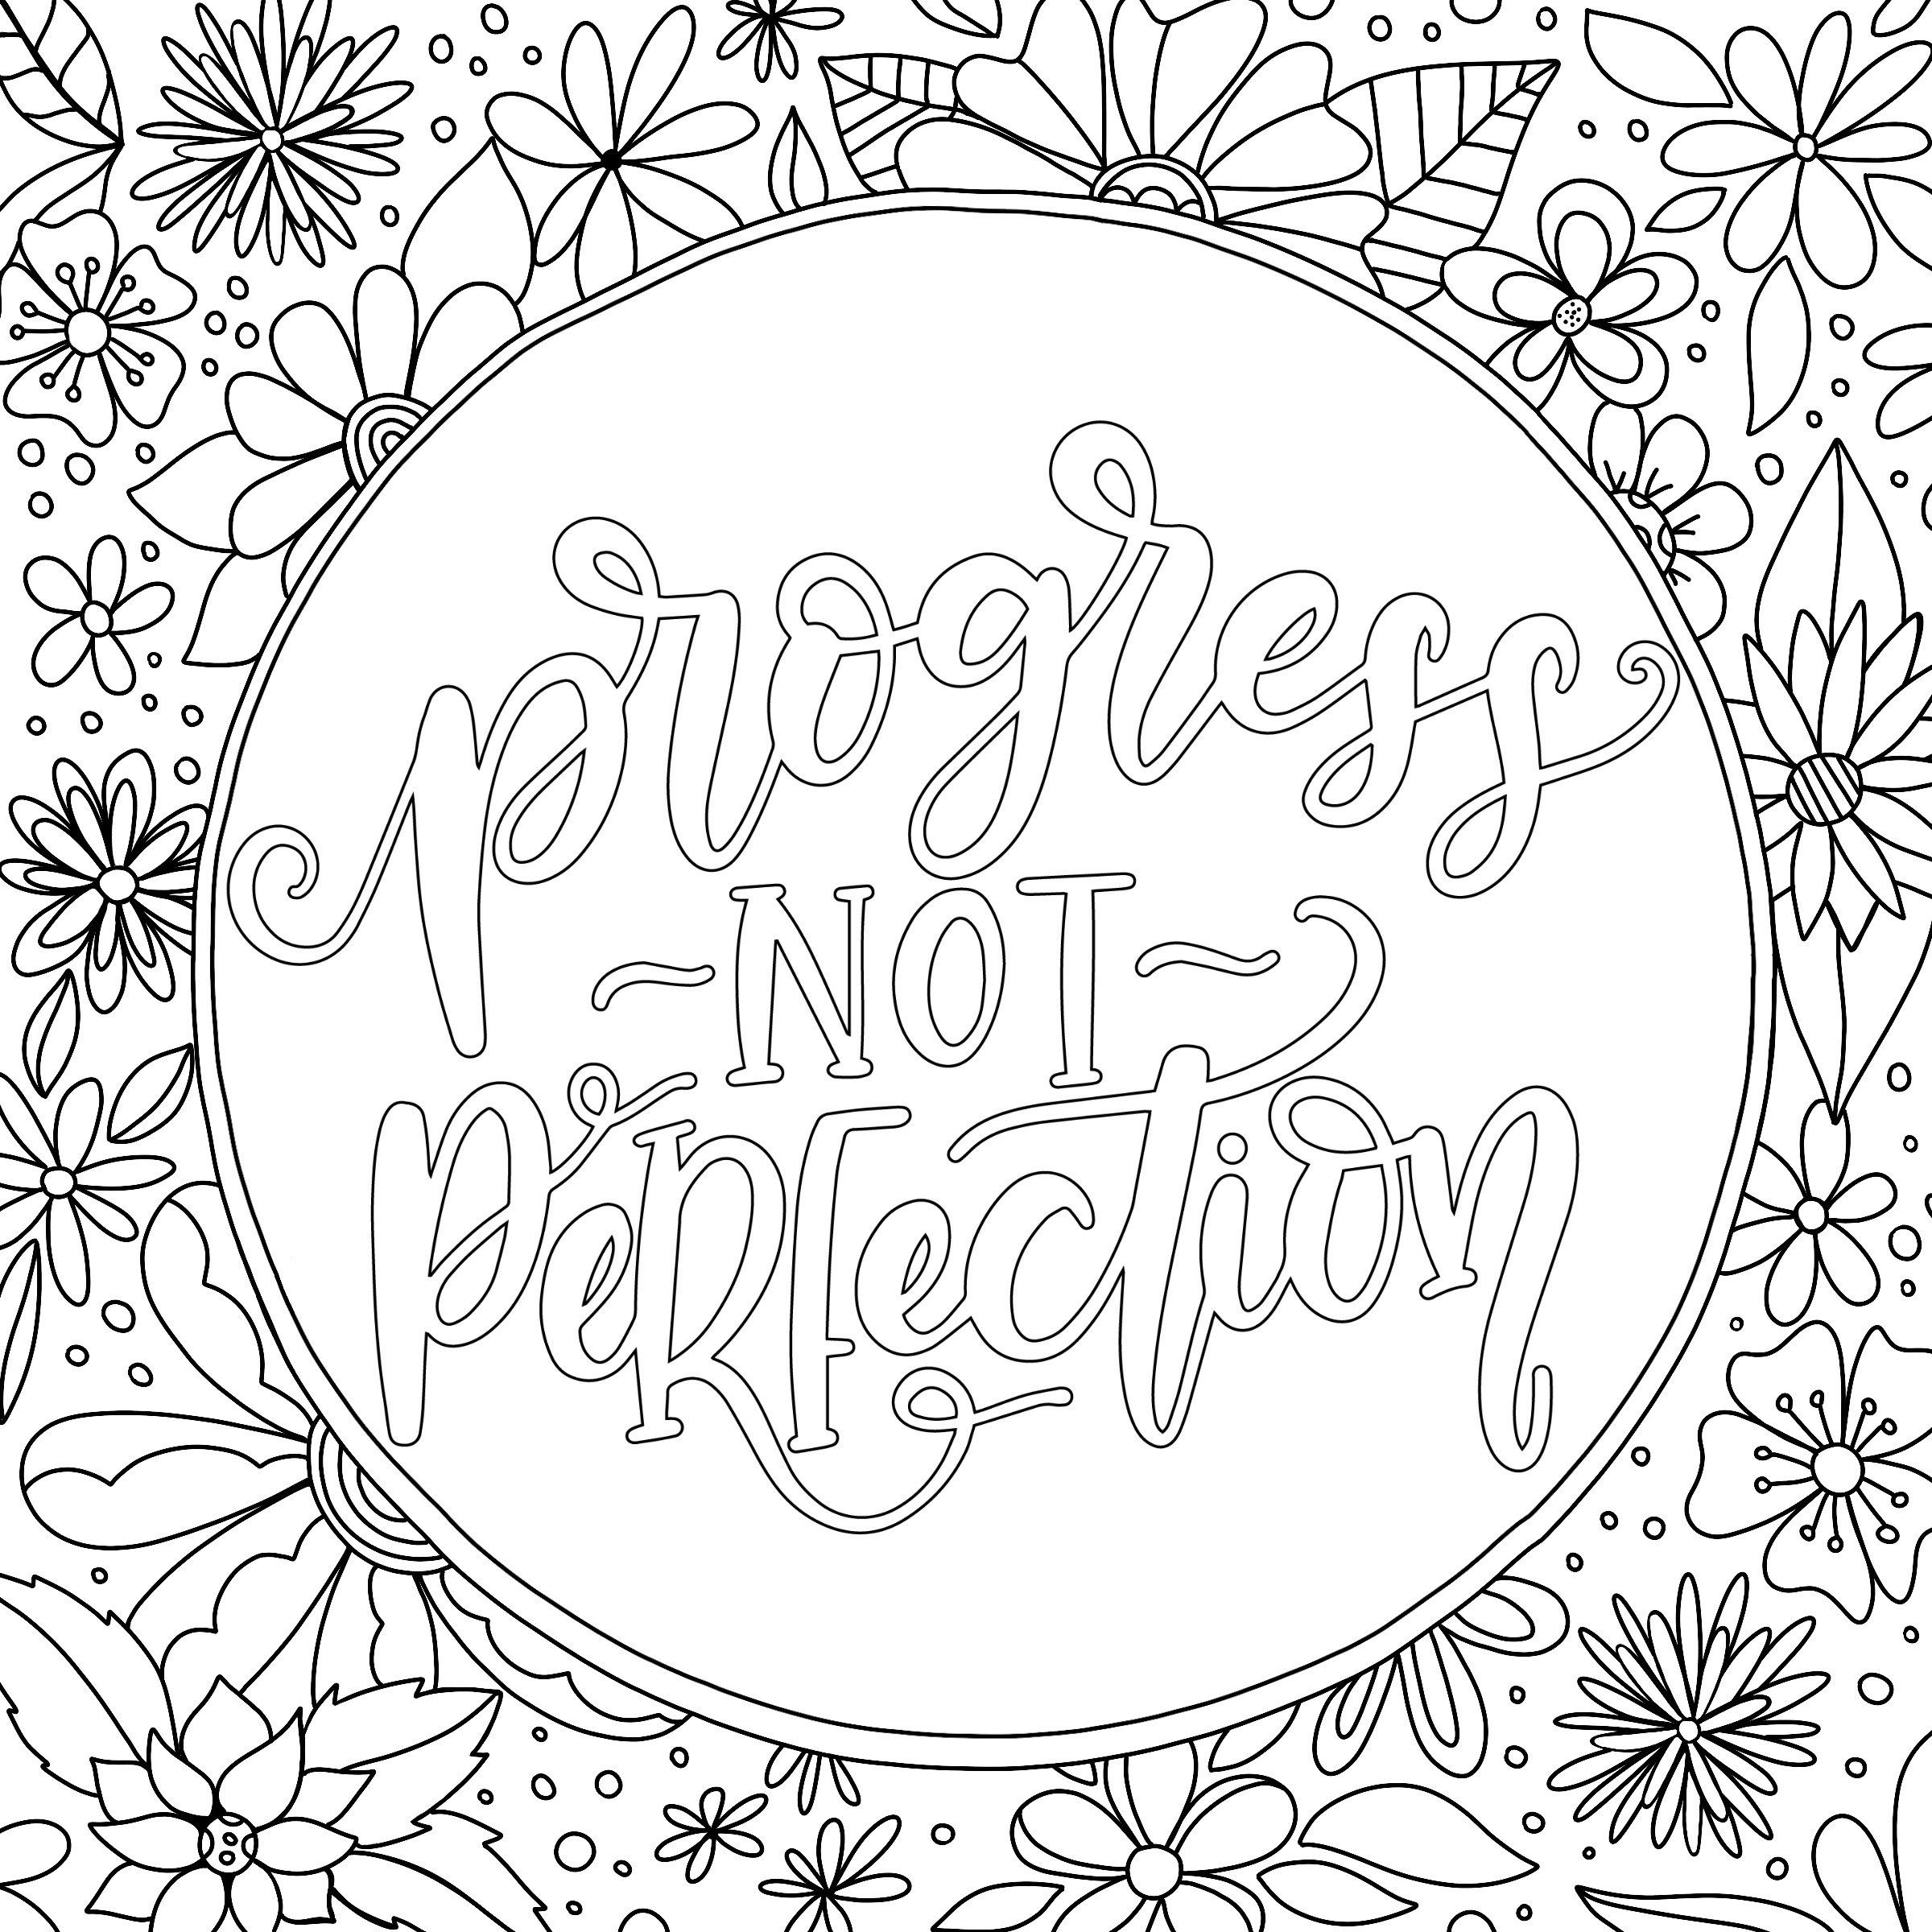 5 Printable Coloring Pages - I AM Coloring Bundle 